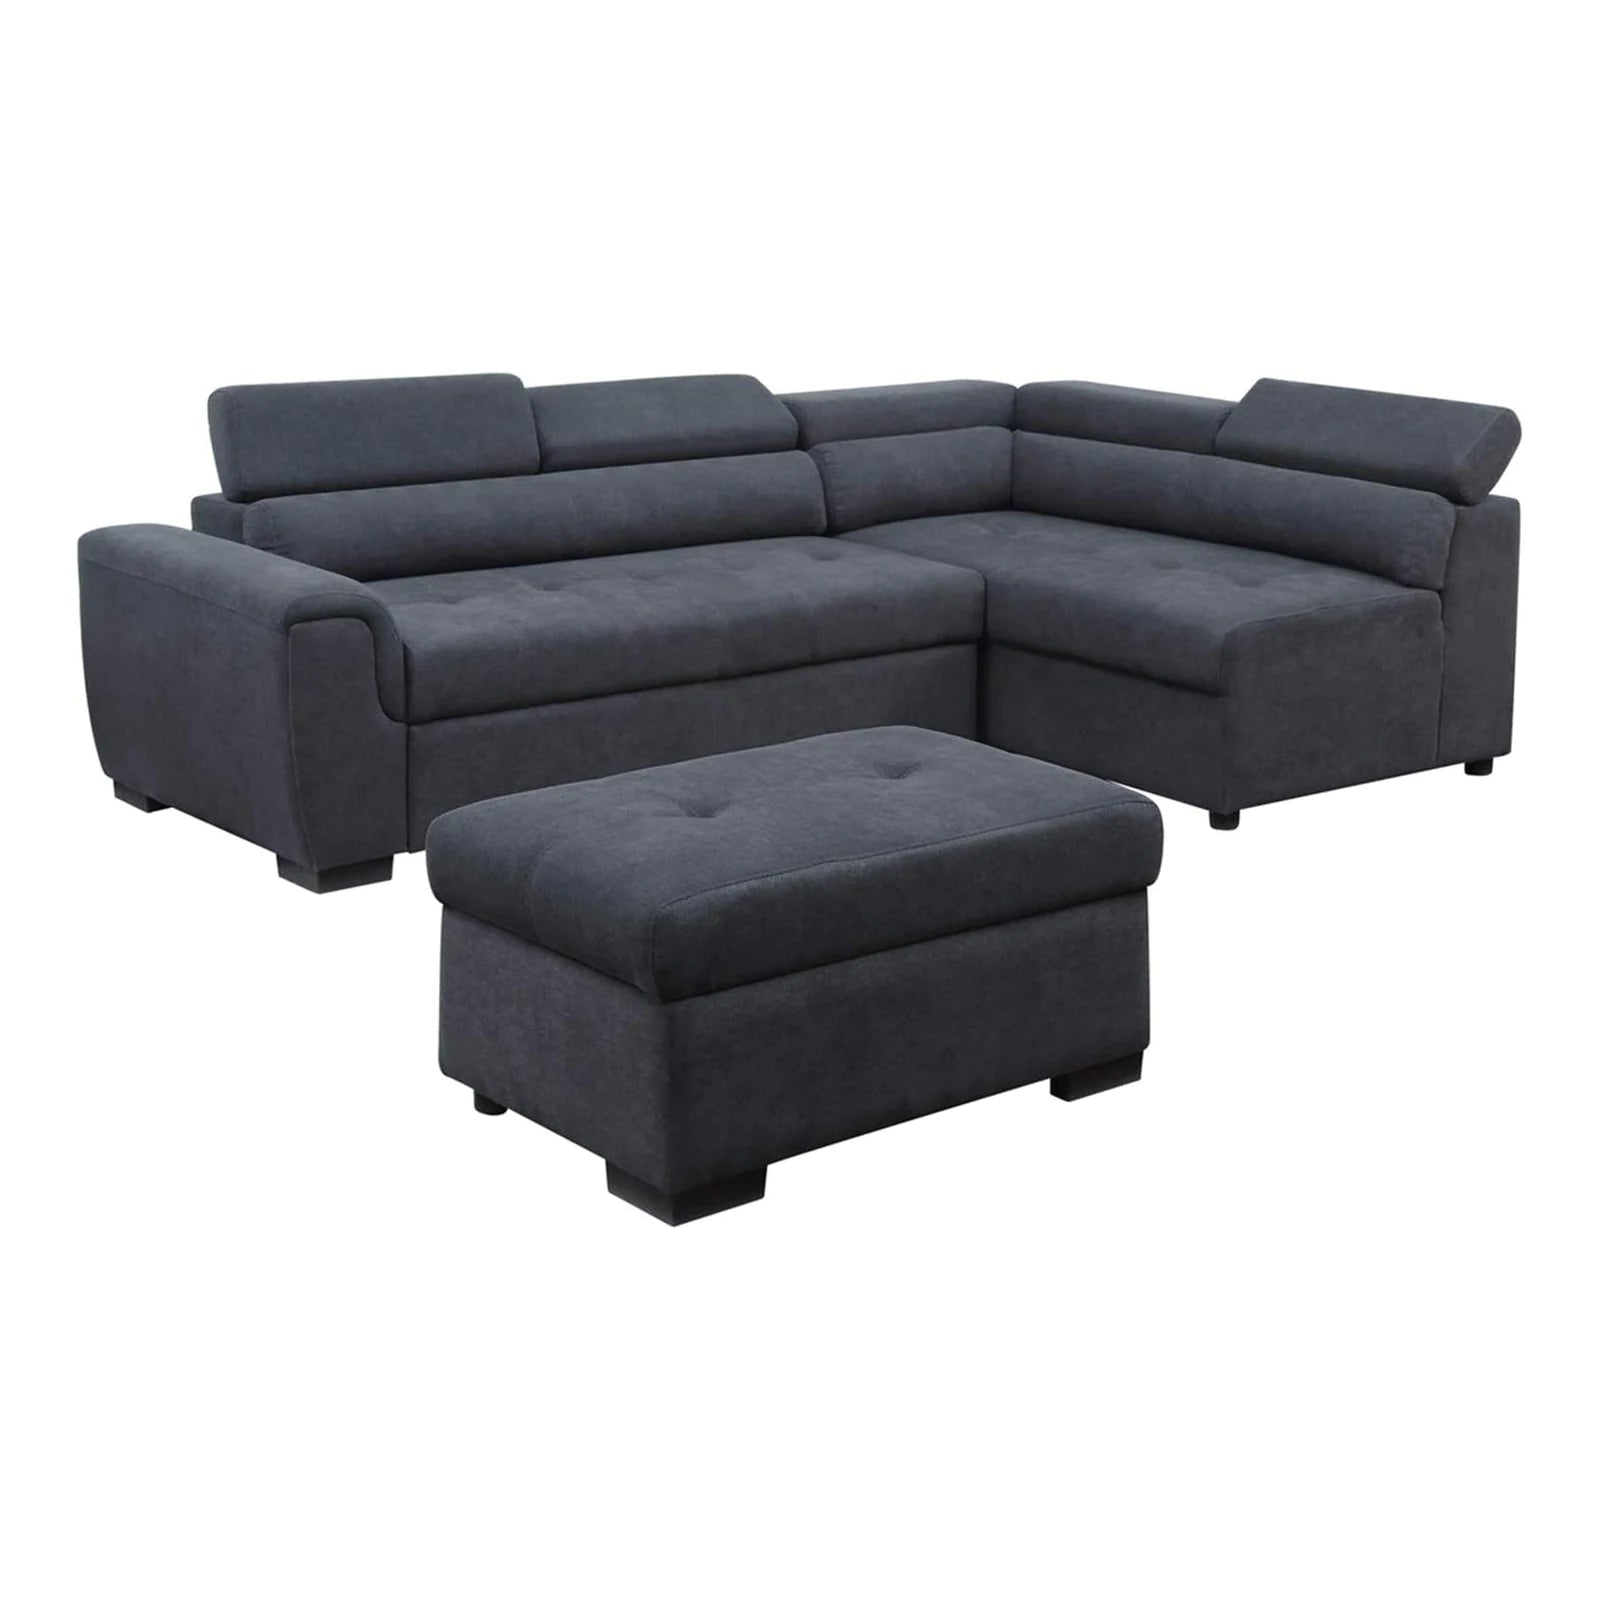 Fabric Sectional Sofa with Adjustable Headrest and Storage Ottoman